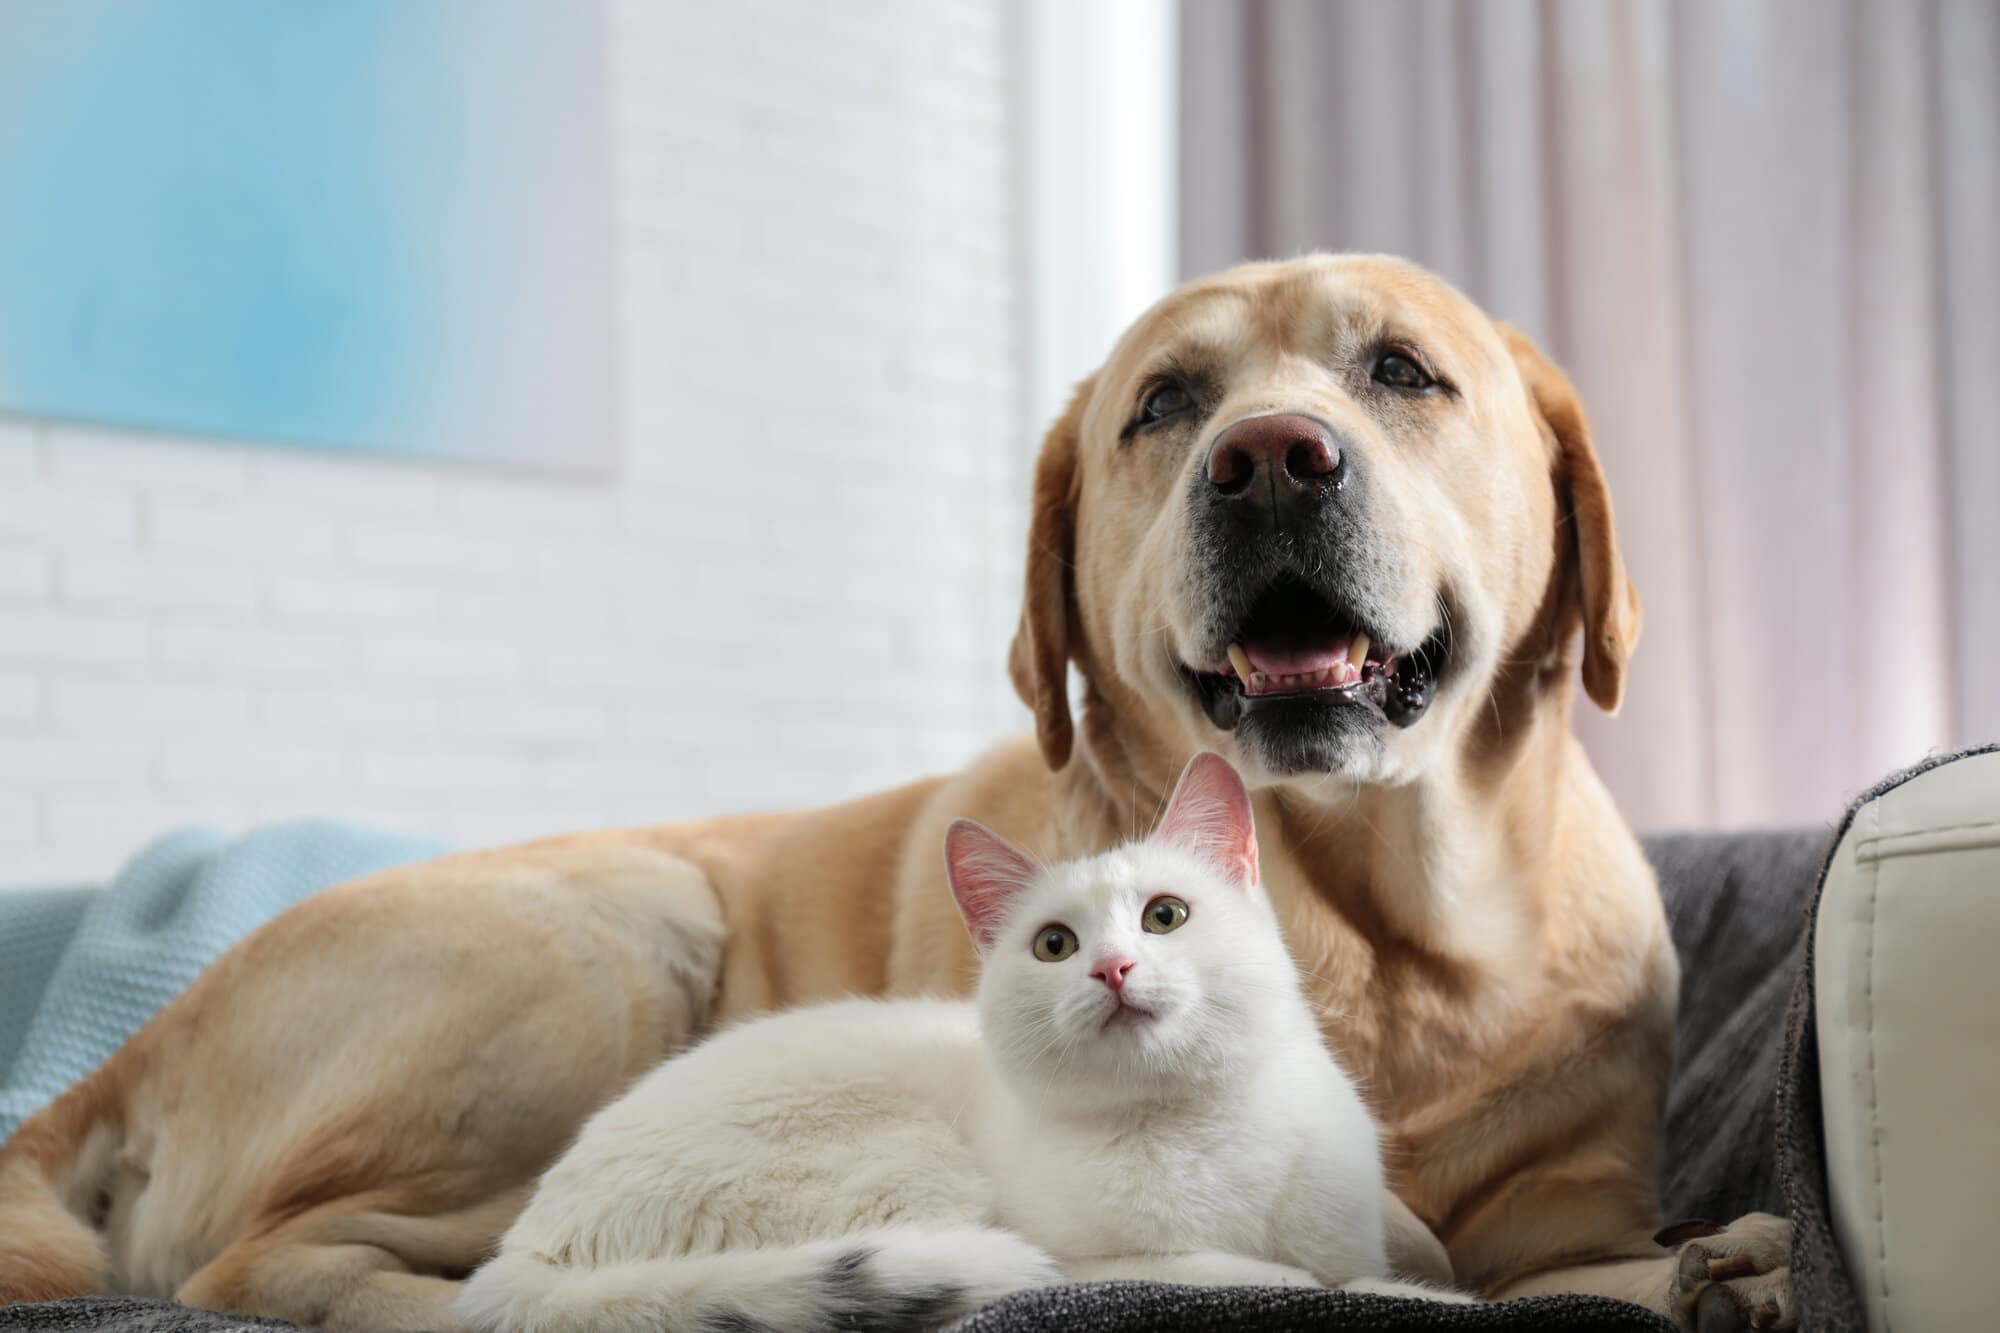 healthy white cat and golden dog laying together on a sofa indoors looking happy to be next to each other